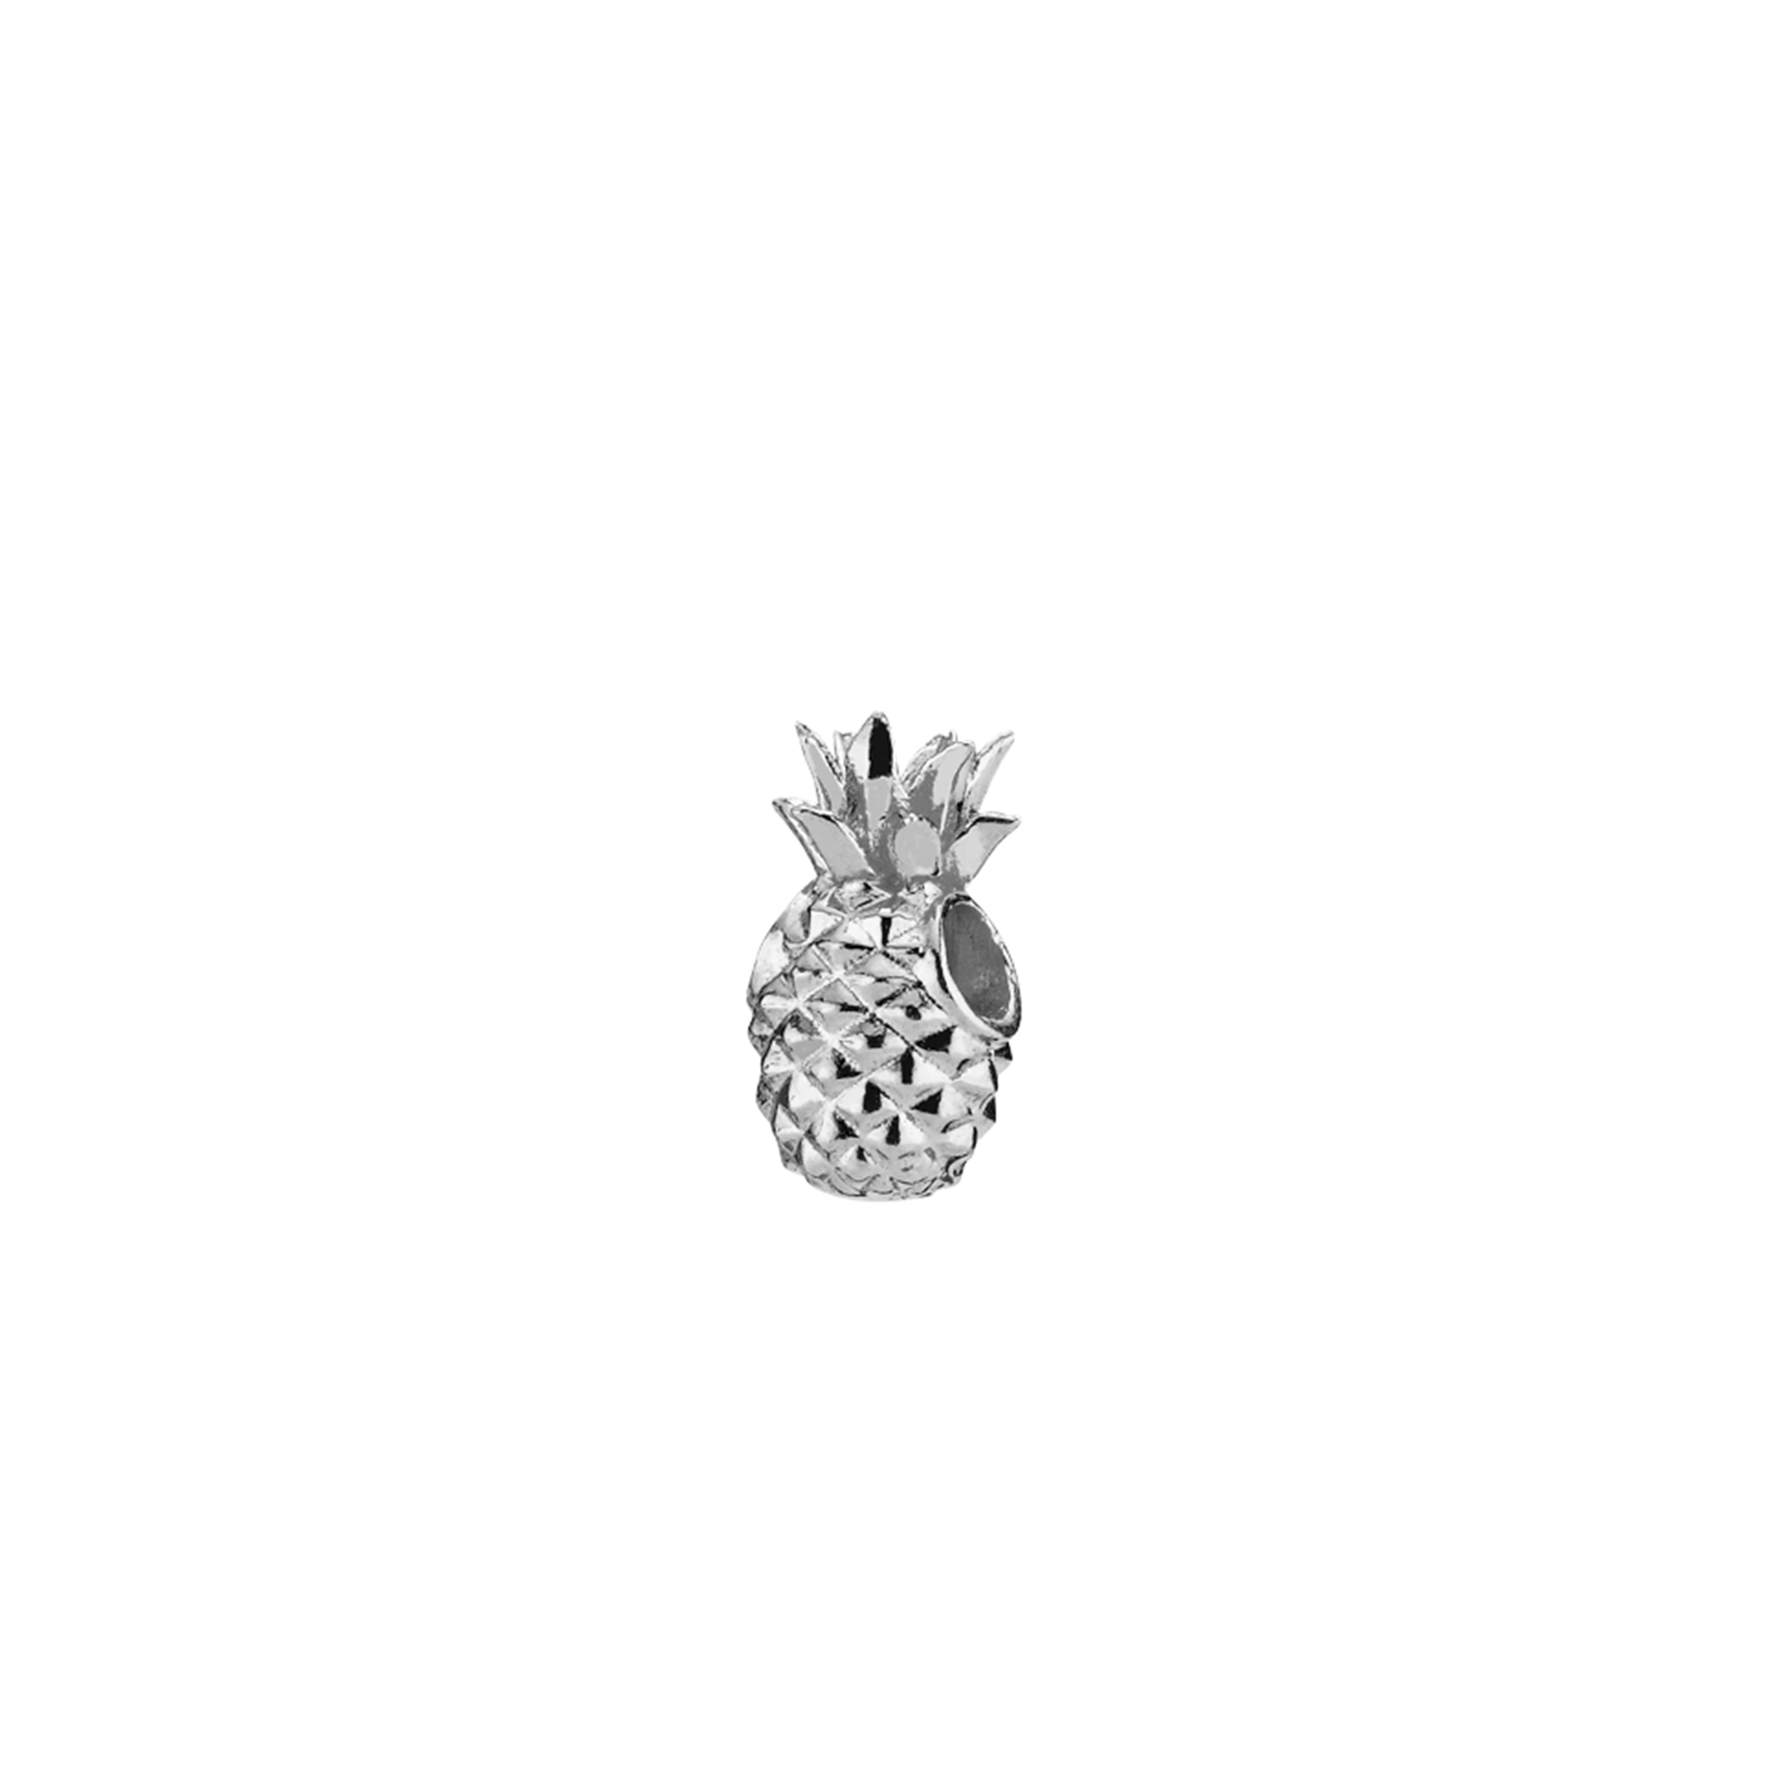 Anna by Sistie Pendant from Sistie in Silver Sterling 925